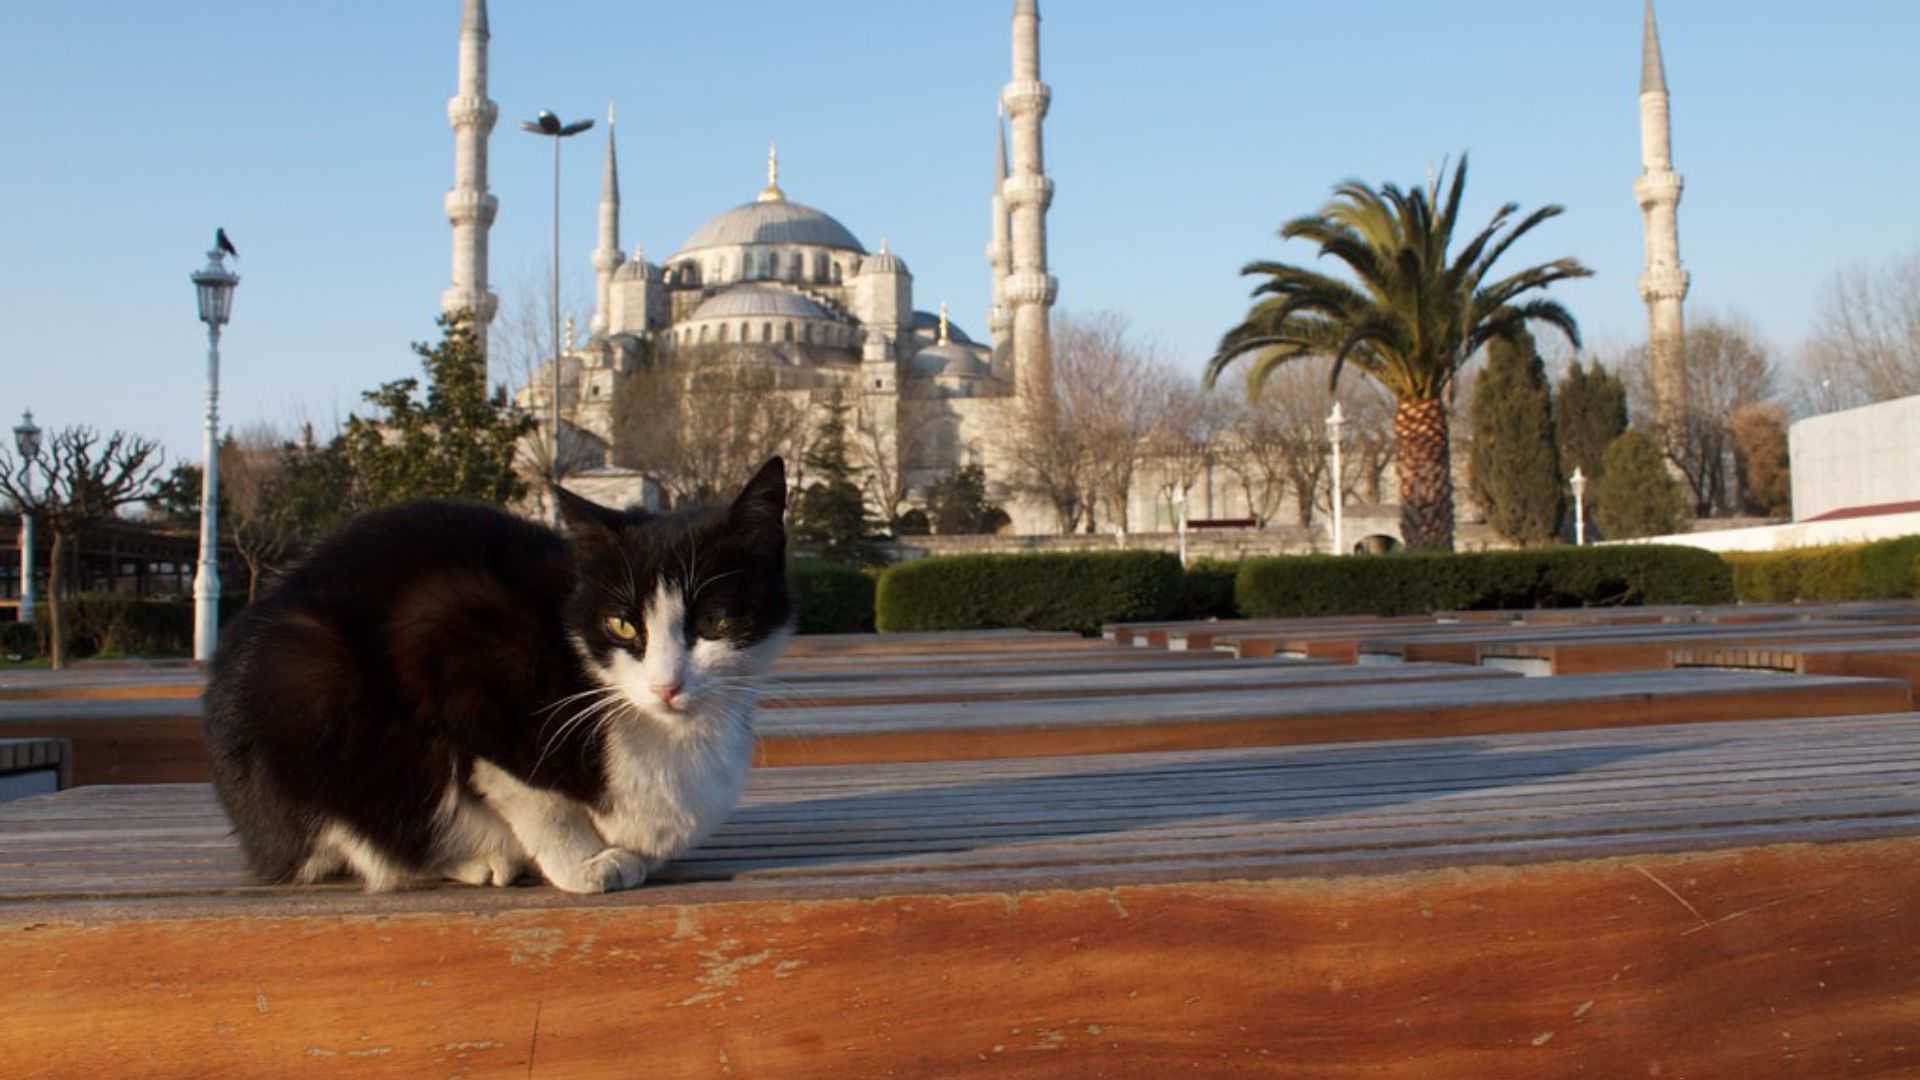 Keeping Cats in Islam: The Most Clean Pet